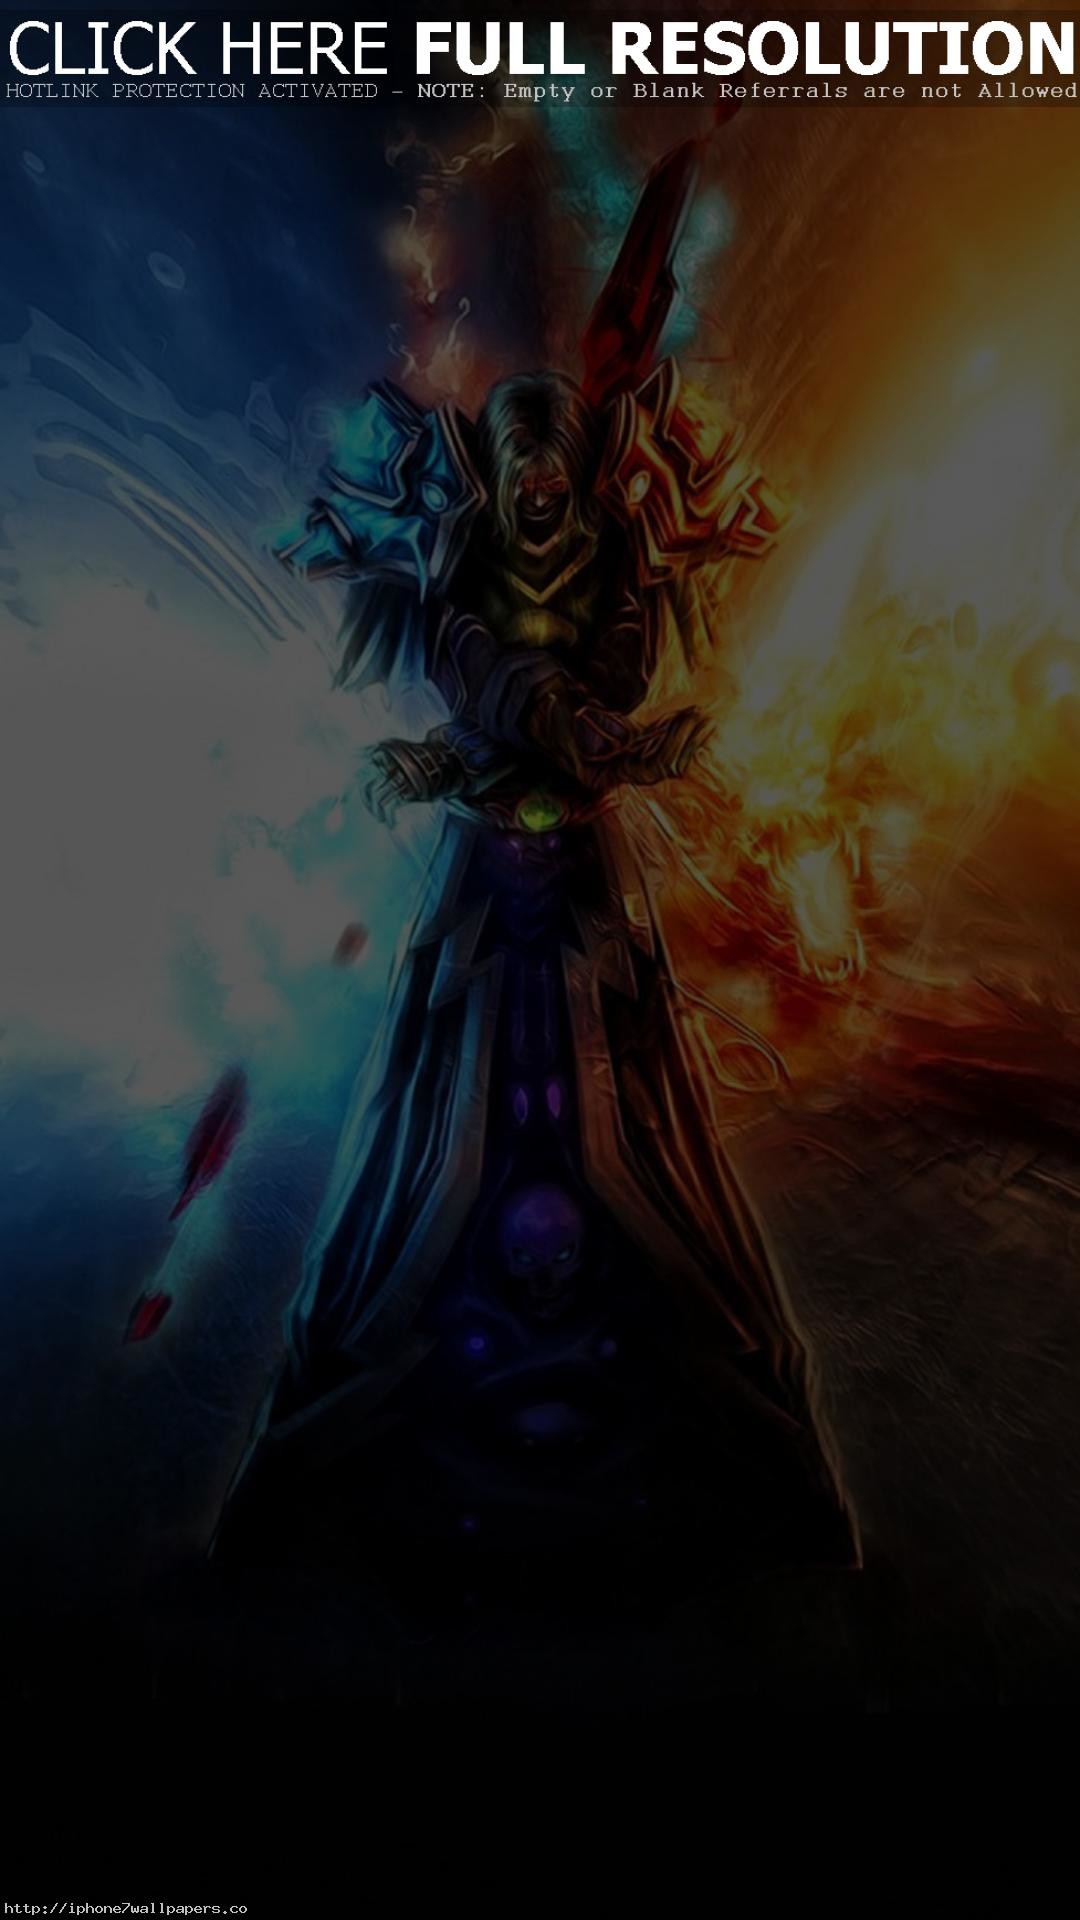 1080x1920, Orange Blue Anime Game Character Android - Wow Warlock Wallpaper Iphone - HD Wallpaper 